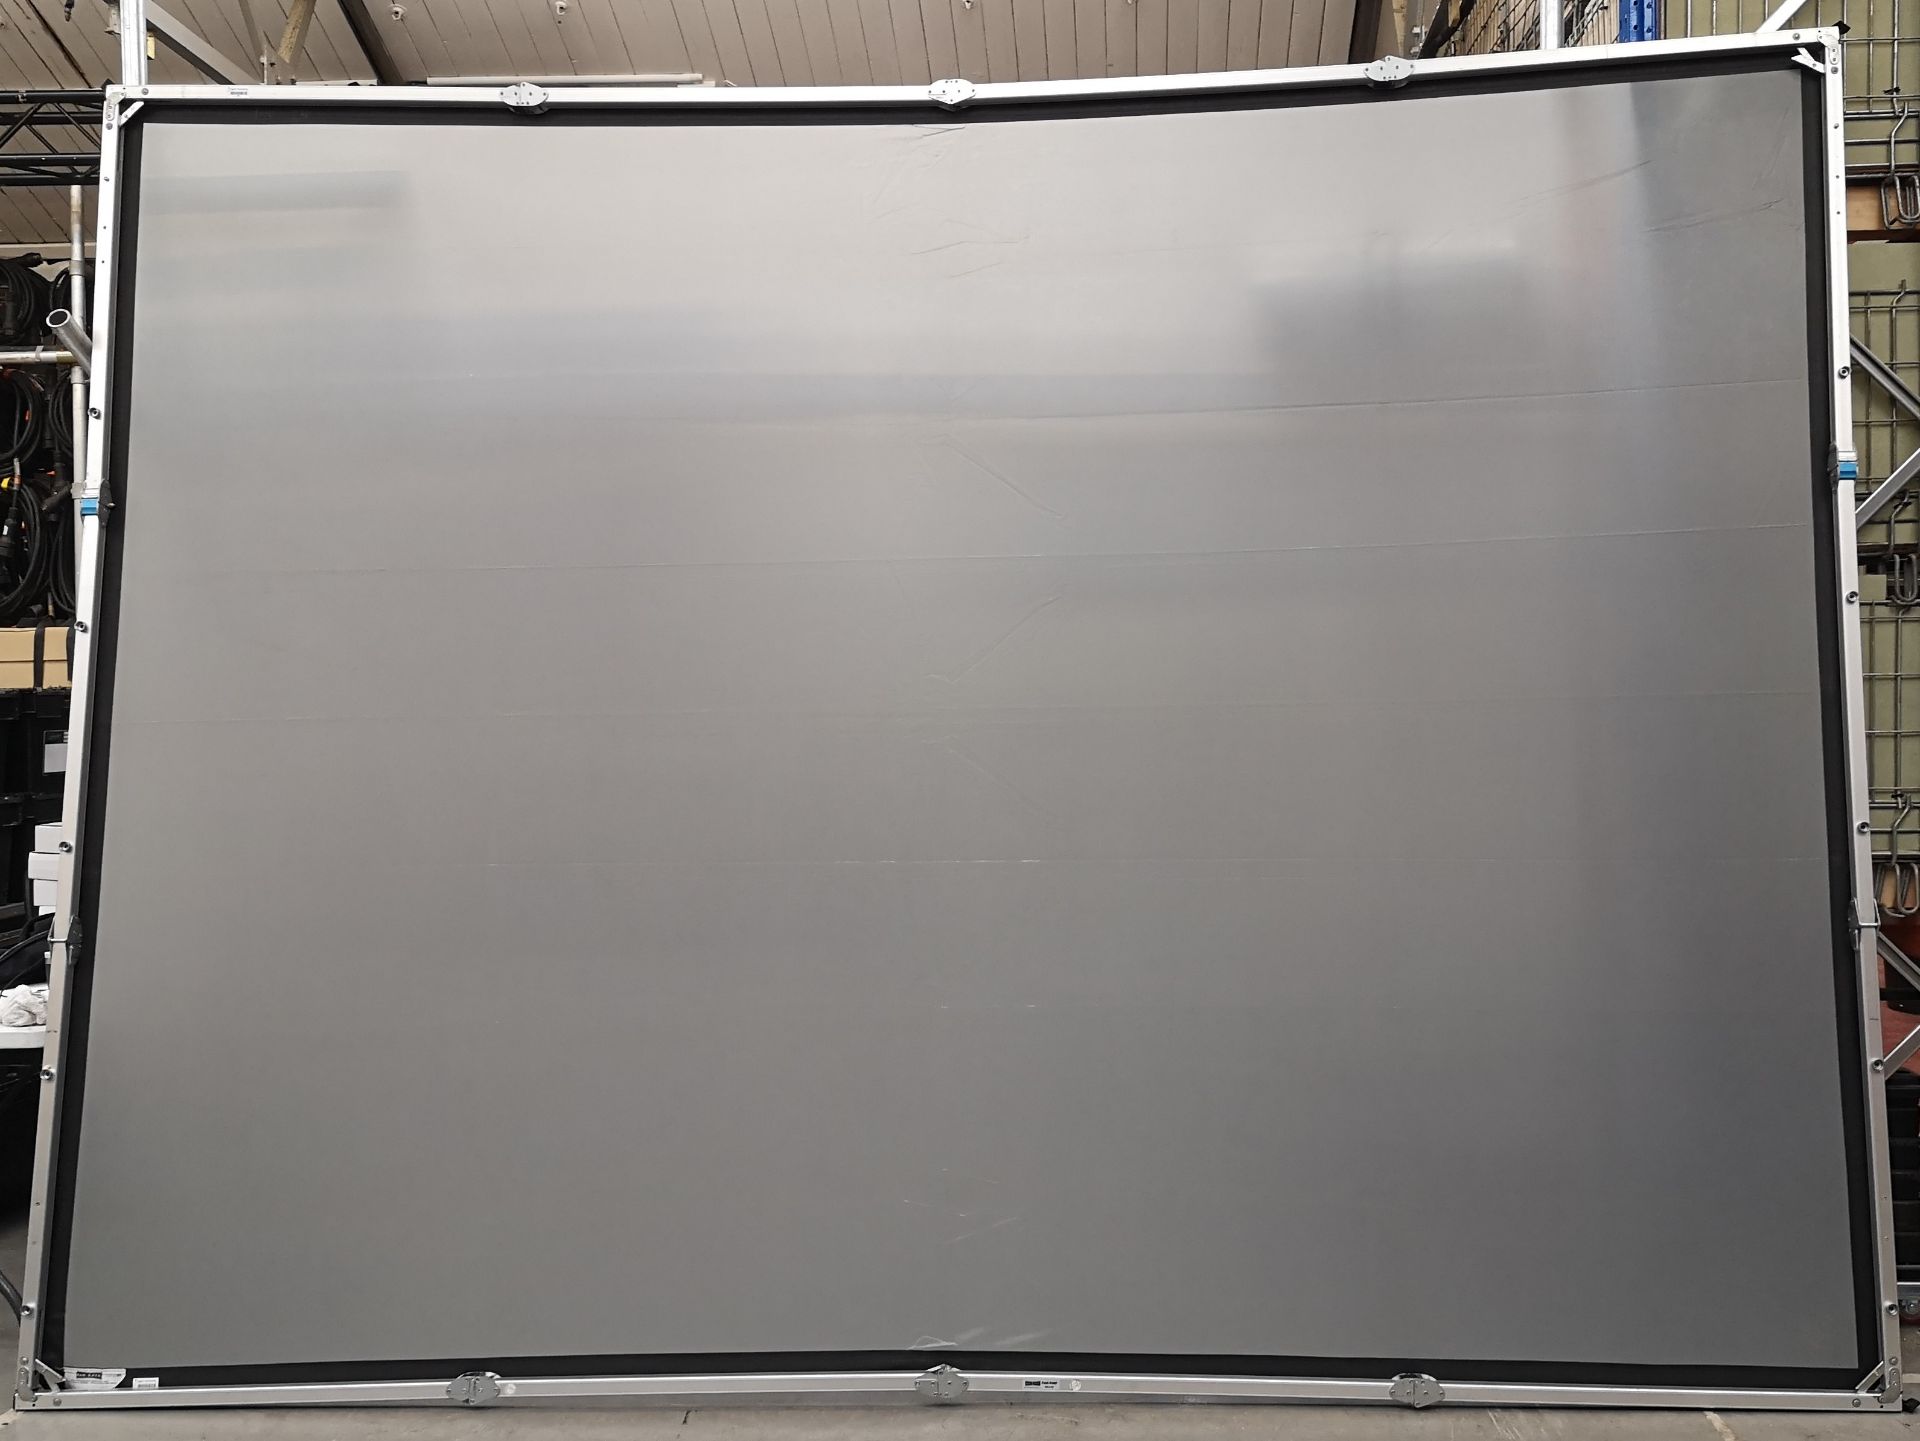 A DA-LITE 12ft x 9ft Rear Projection Fastfold Screen with frame, legs, bolts, screen surface, bag - Image 2 of 10